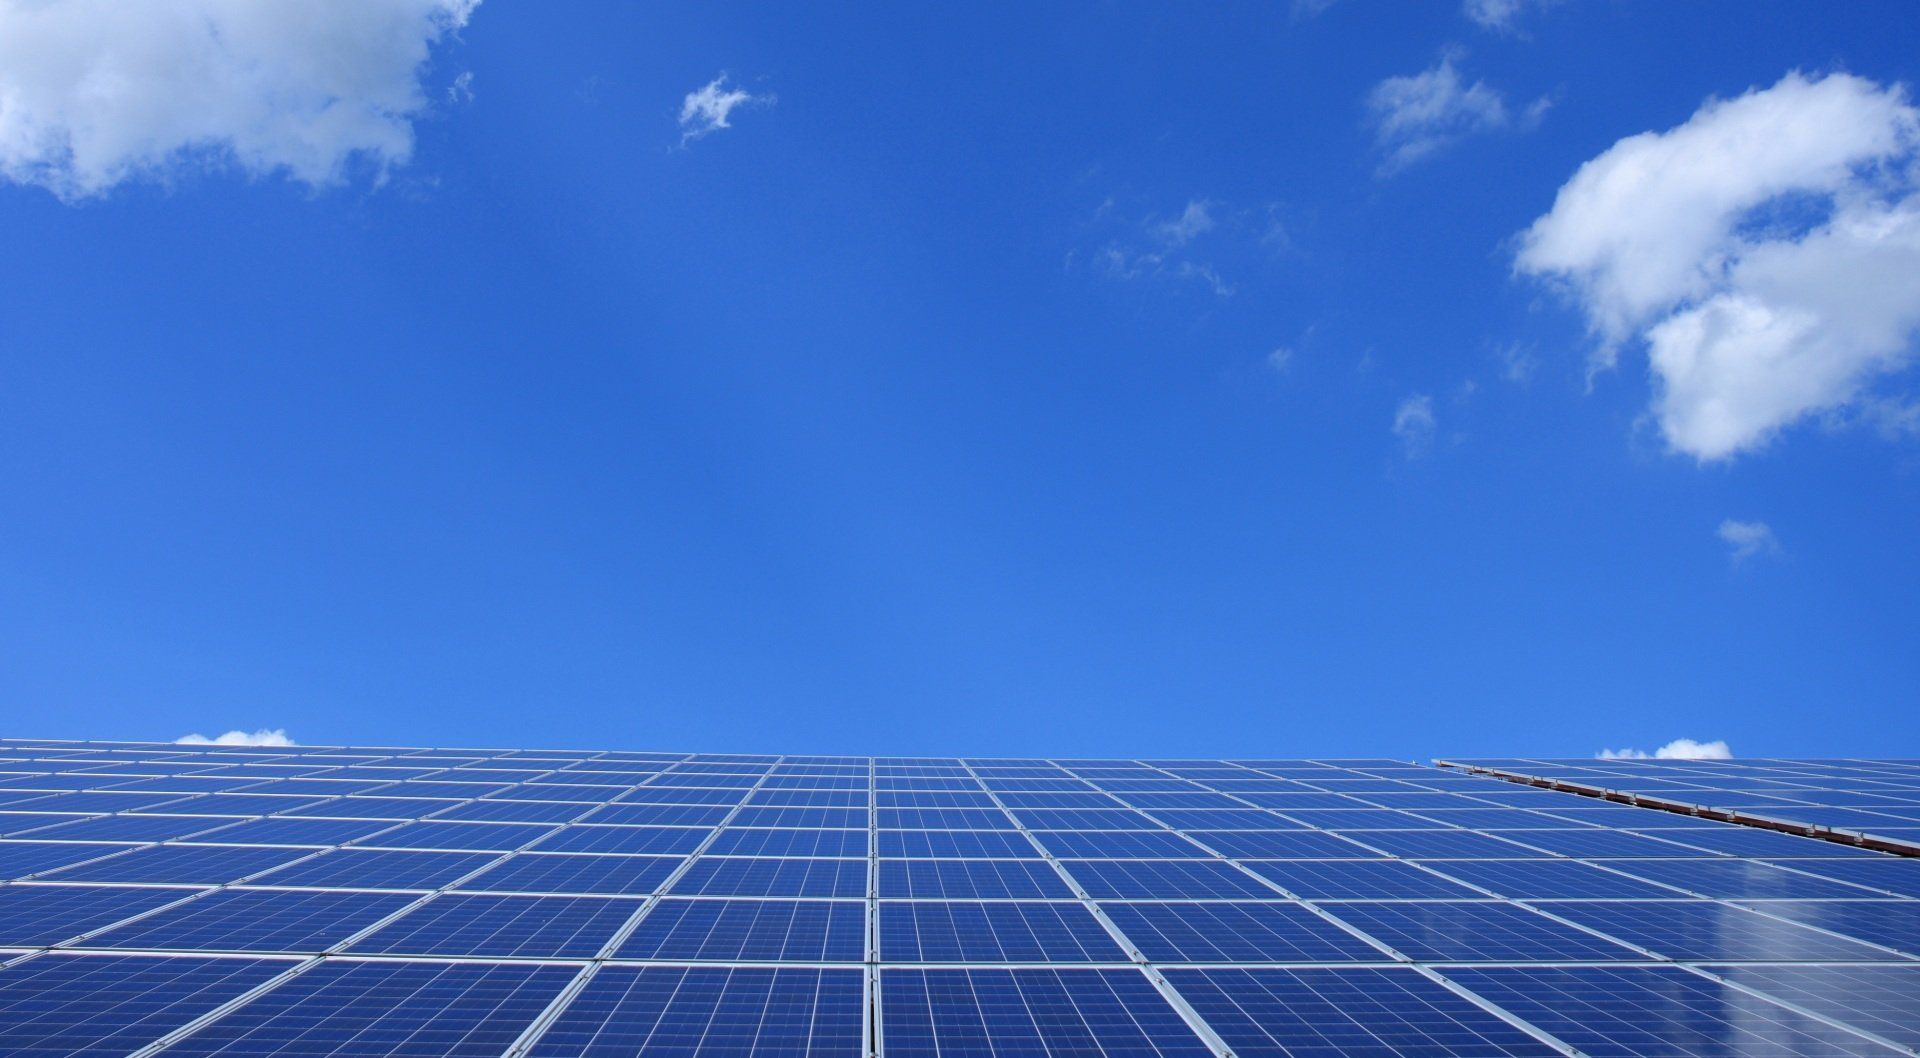 Solar panels below a blue sky with fluffy white clouds